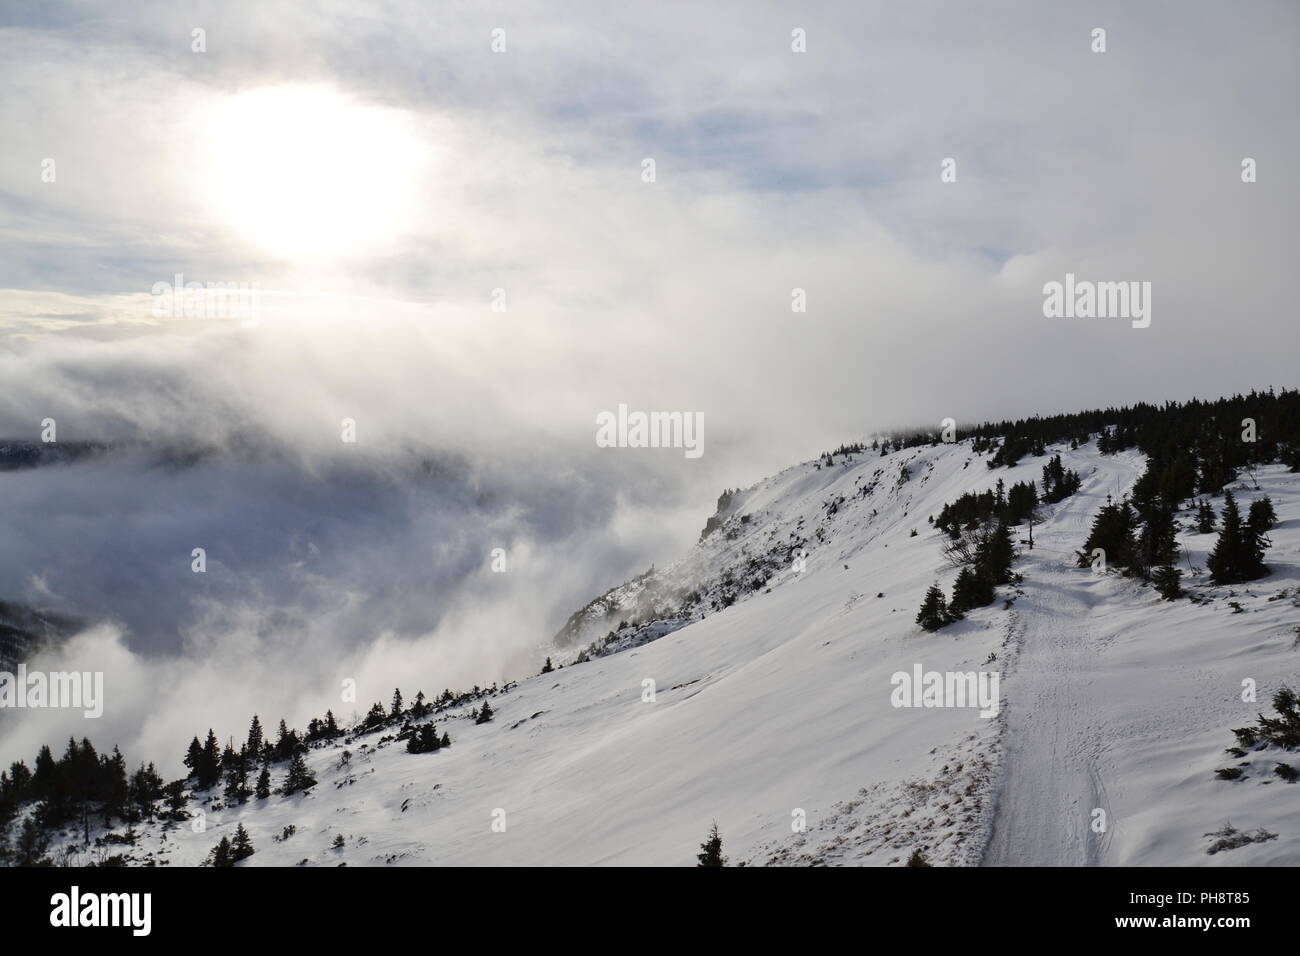 Sunbeams passing through clouds, winter landscape, Elbe valley, freezing weather Stock Photo